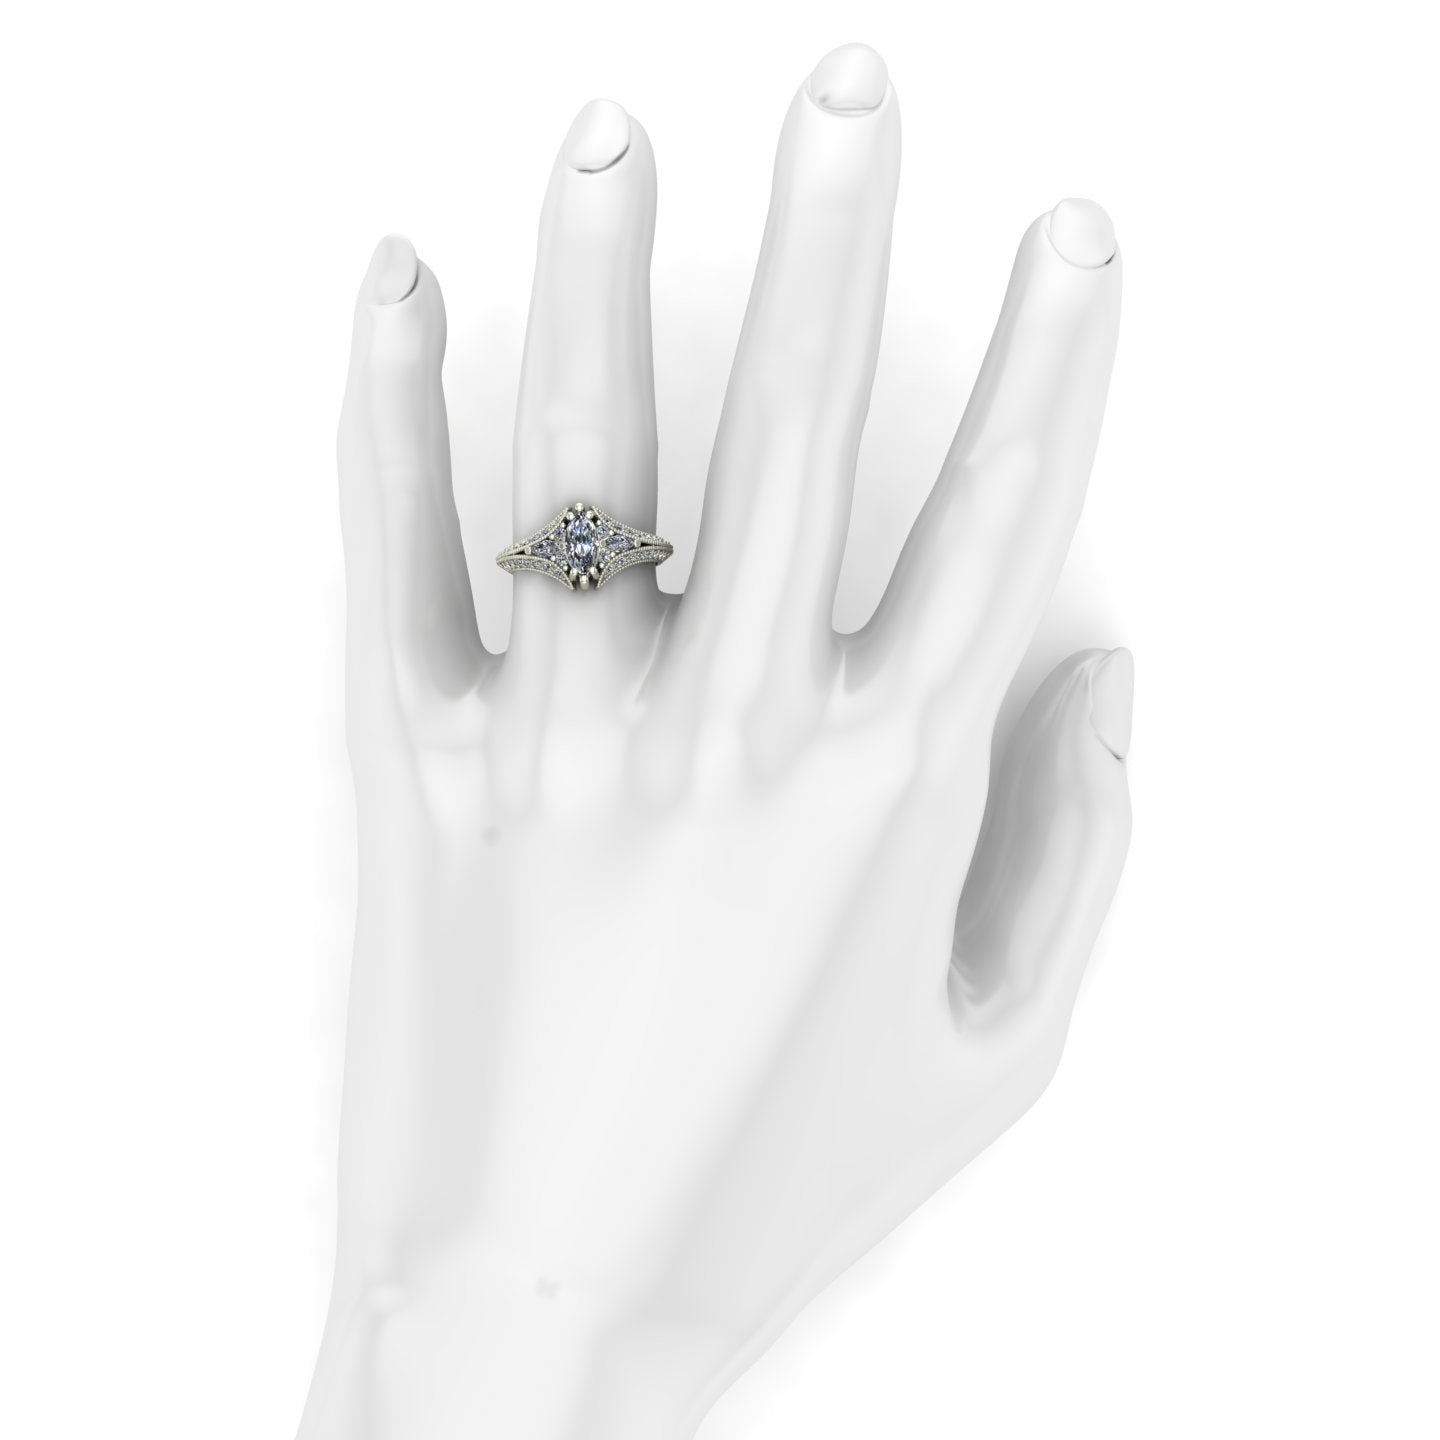 half carat marquise diamond engagement ring in 14k white gold - Charles Babb Designs - on hand